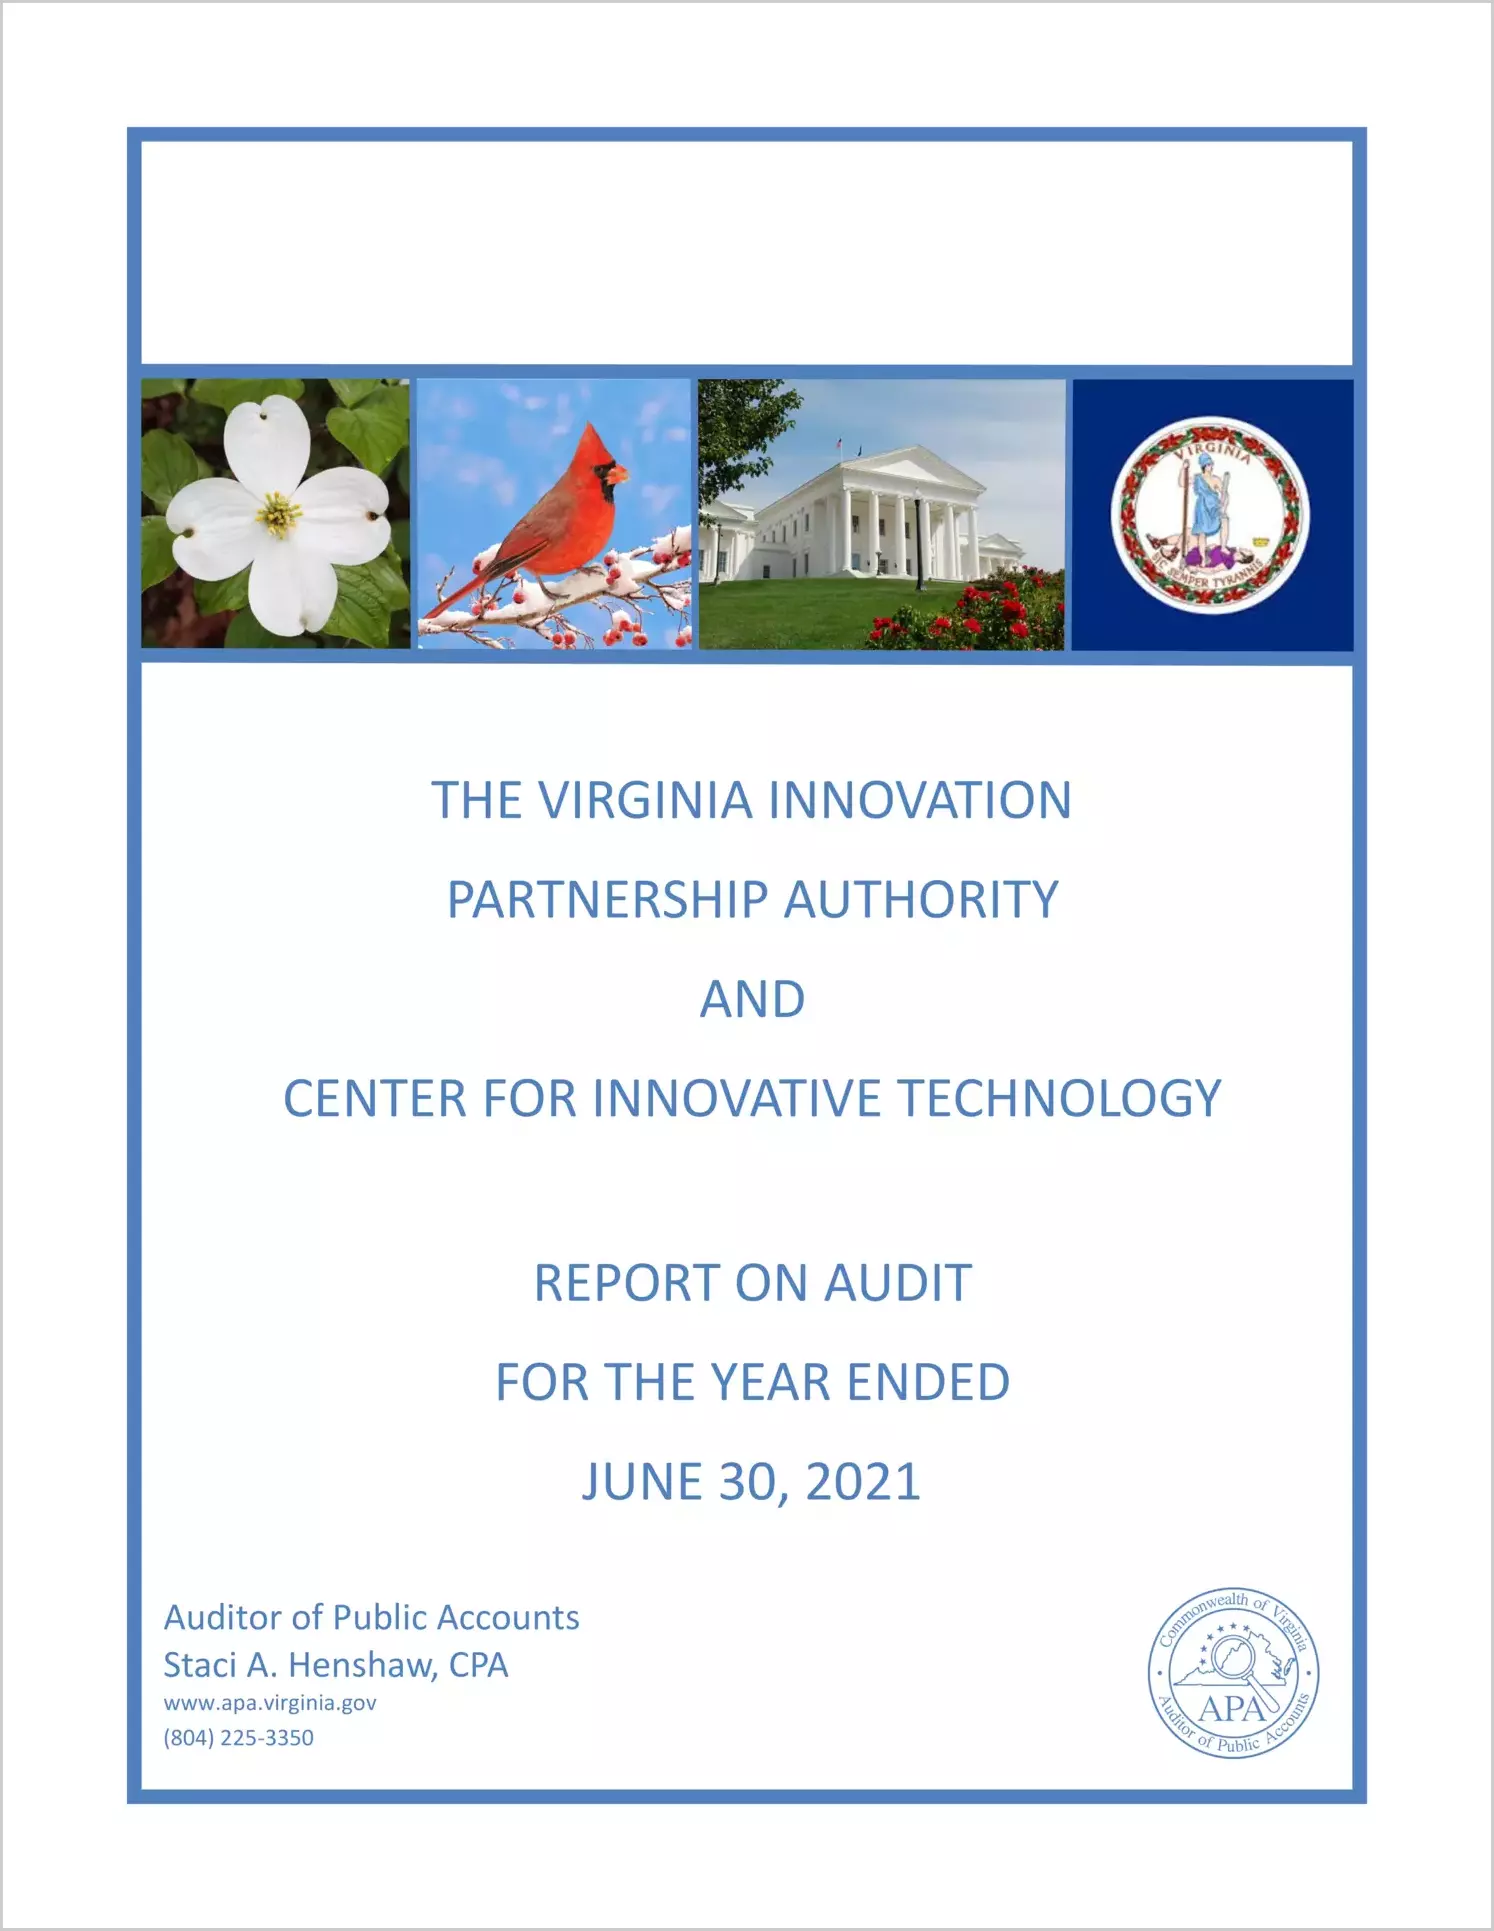 The Virginia Innovation Partnership Authority and Center for Innovative Technology for the year ended June 30, 2021